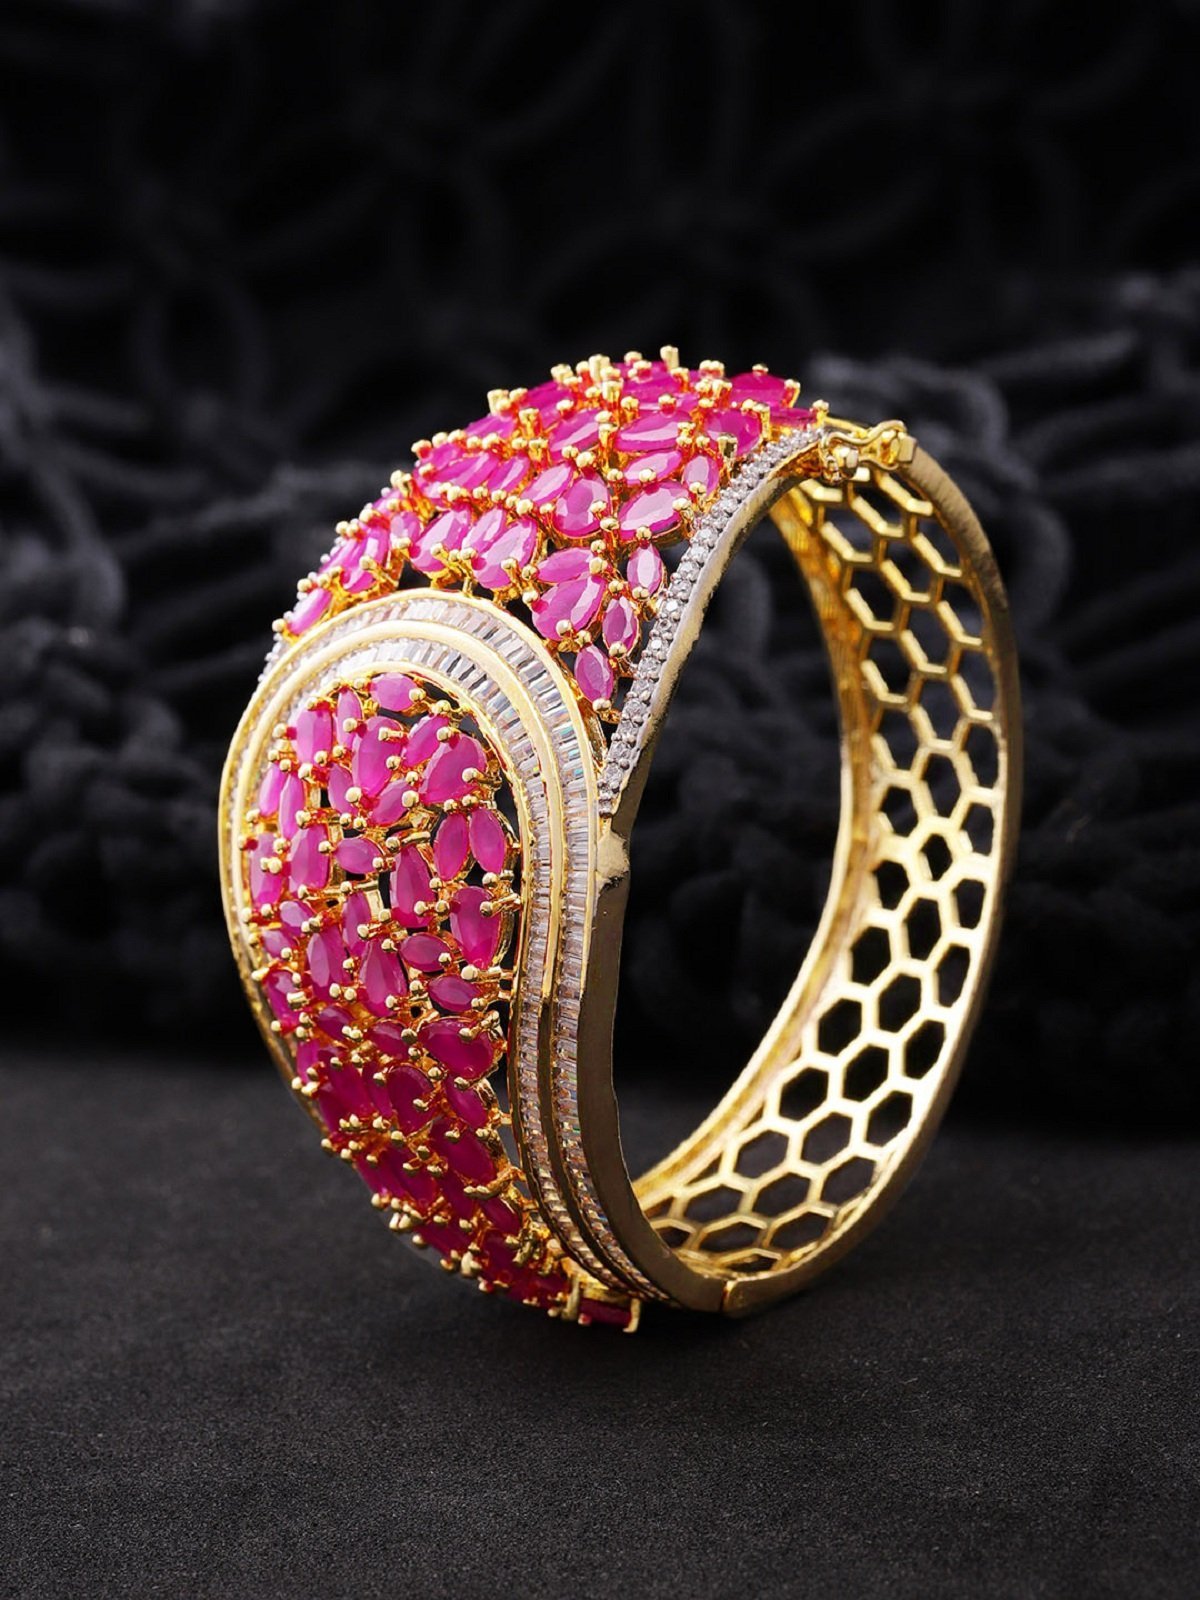 Women's Gold-Plated American Diamond and Ruby Studded Kada Bracelet in Pink Color - Priyaasi